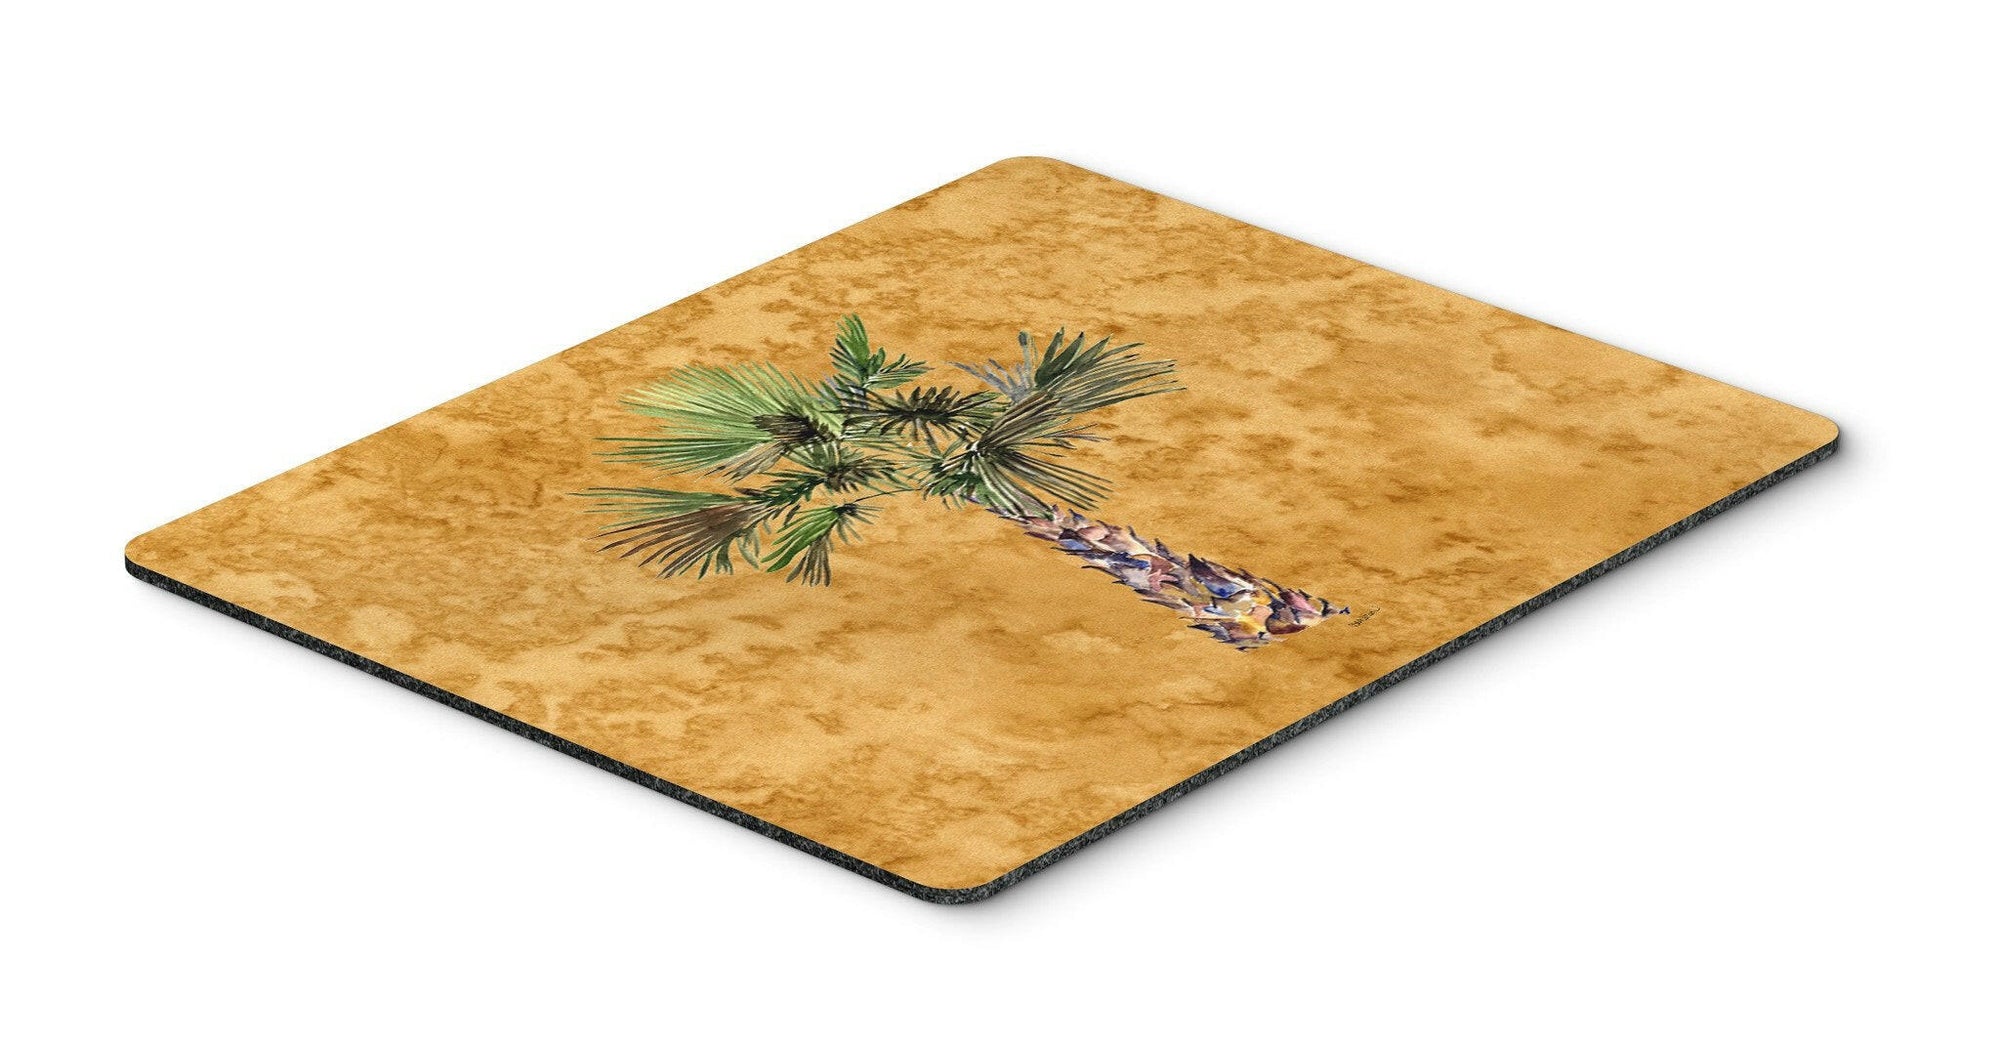 Palm Tree on Gold Mouse Pad, Hot Pad or Trivet 8706MP by Caroline's Treasures